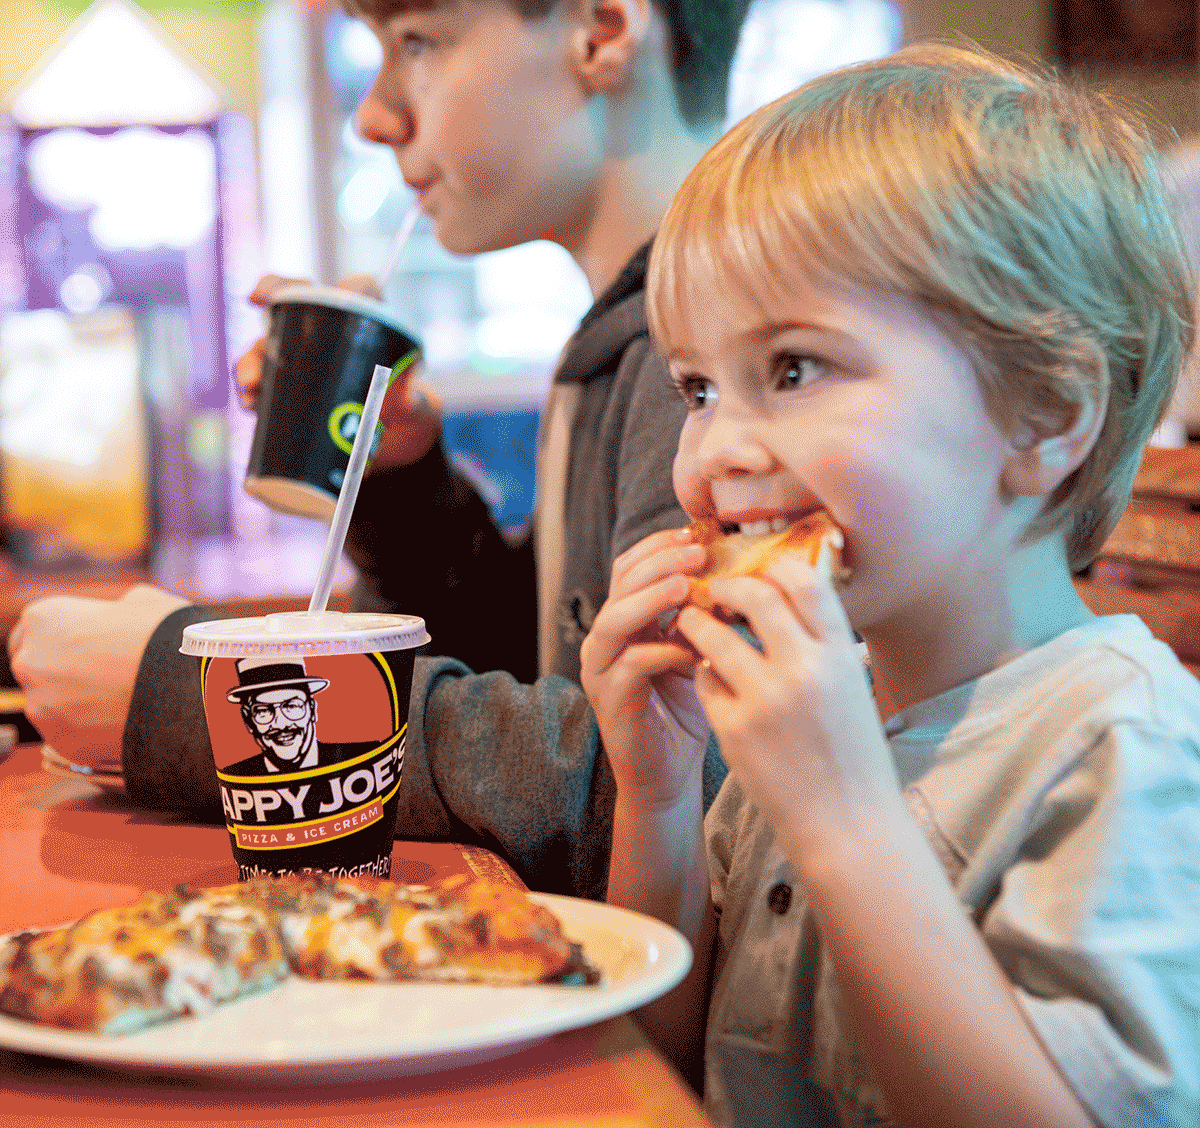 Child eating a slice of pizza at Happy Joe's